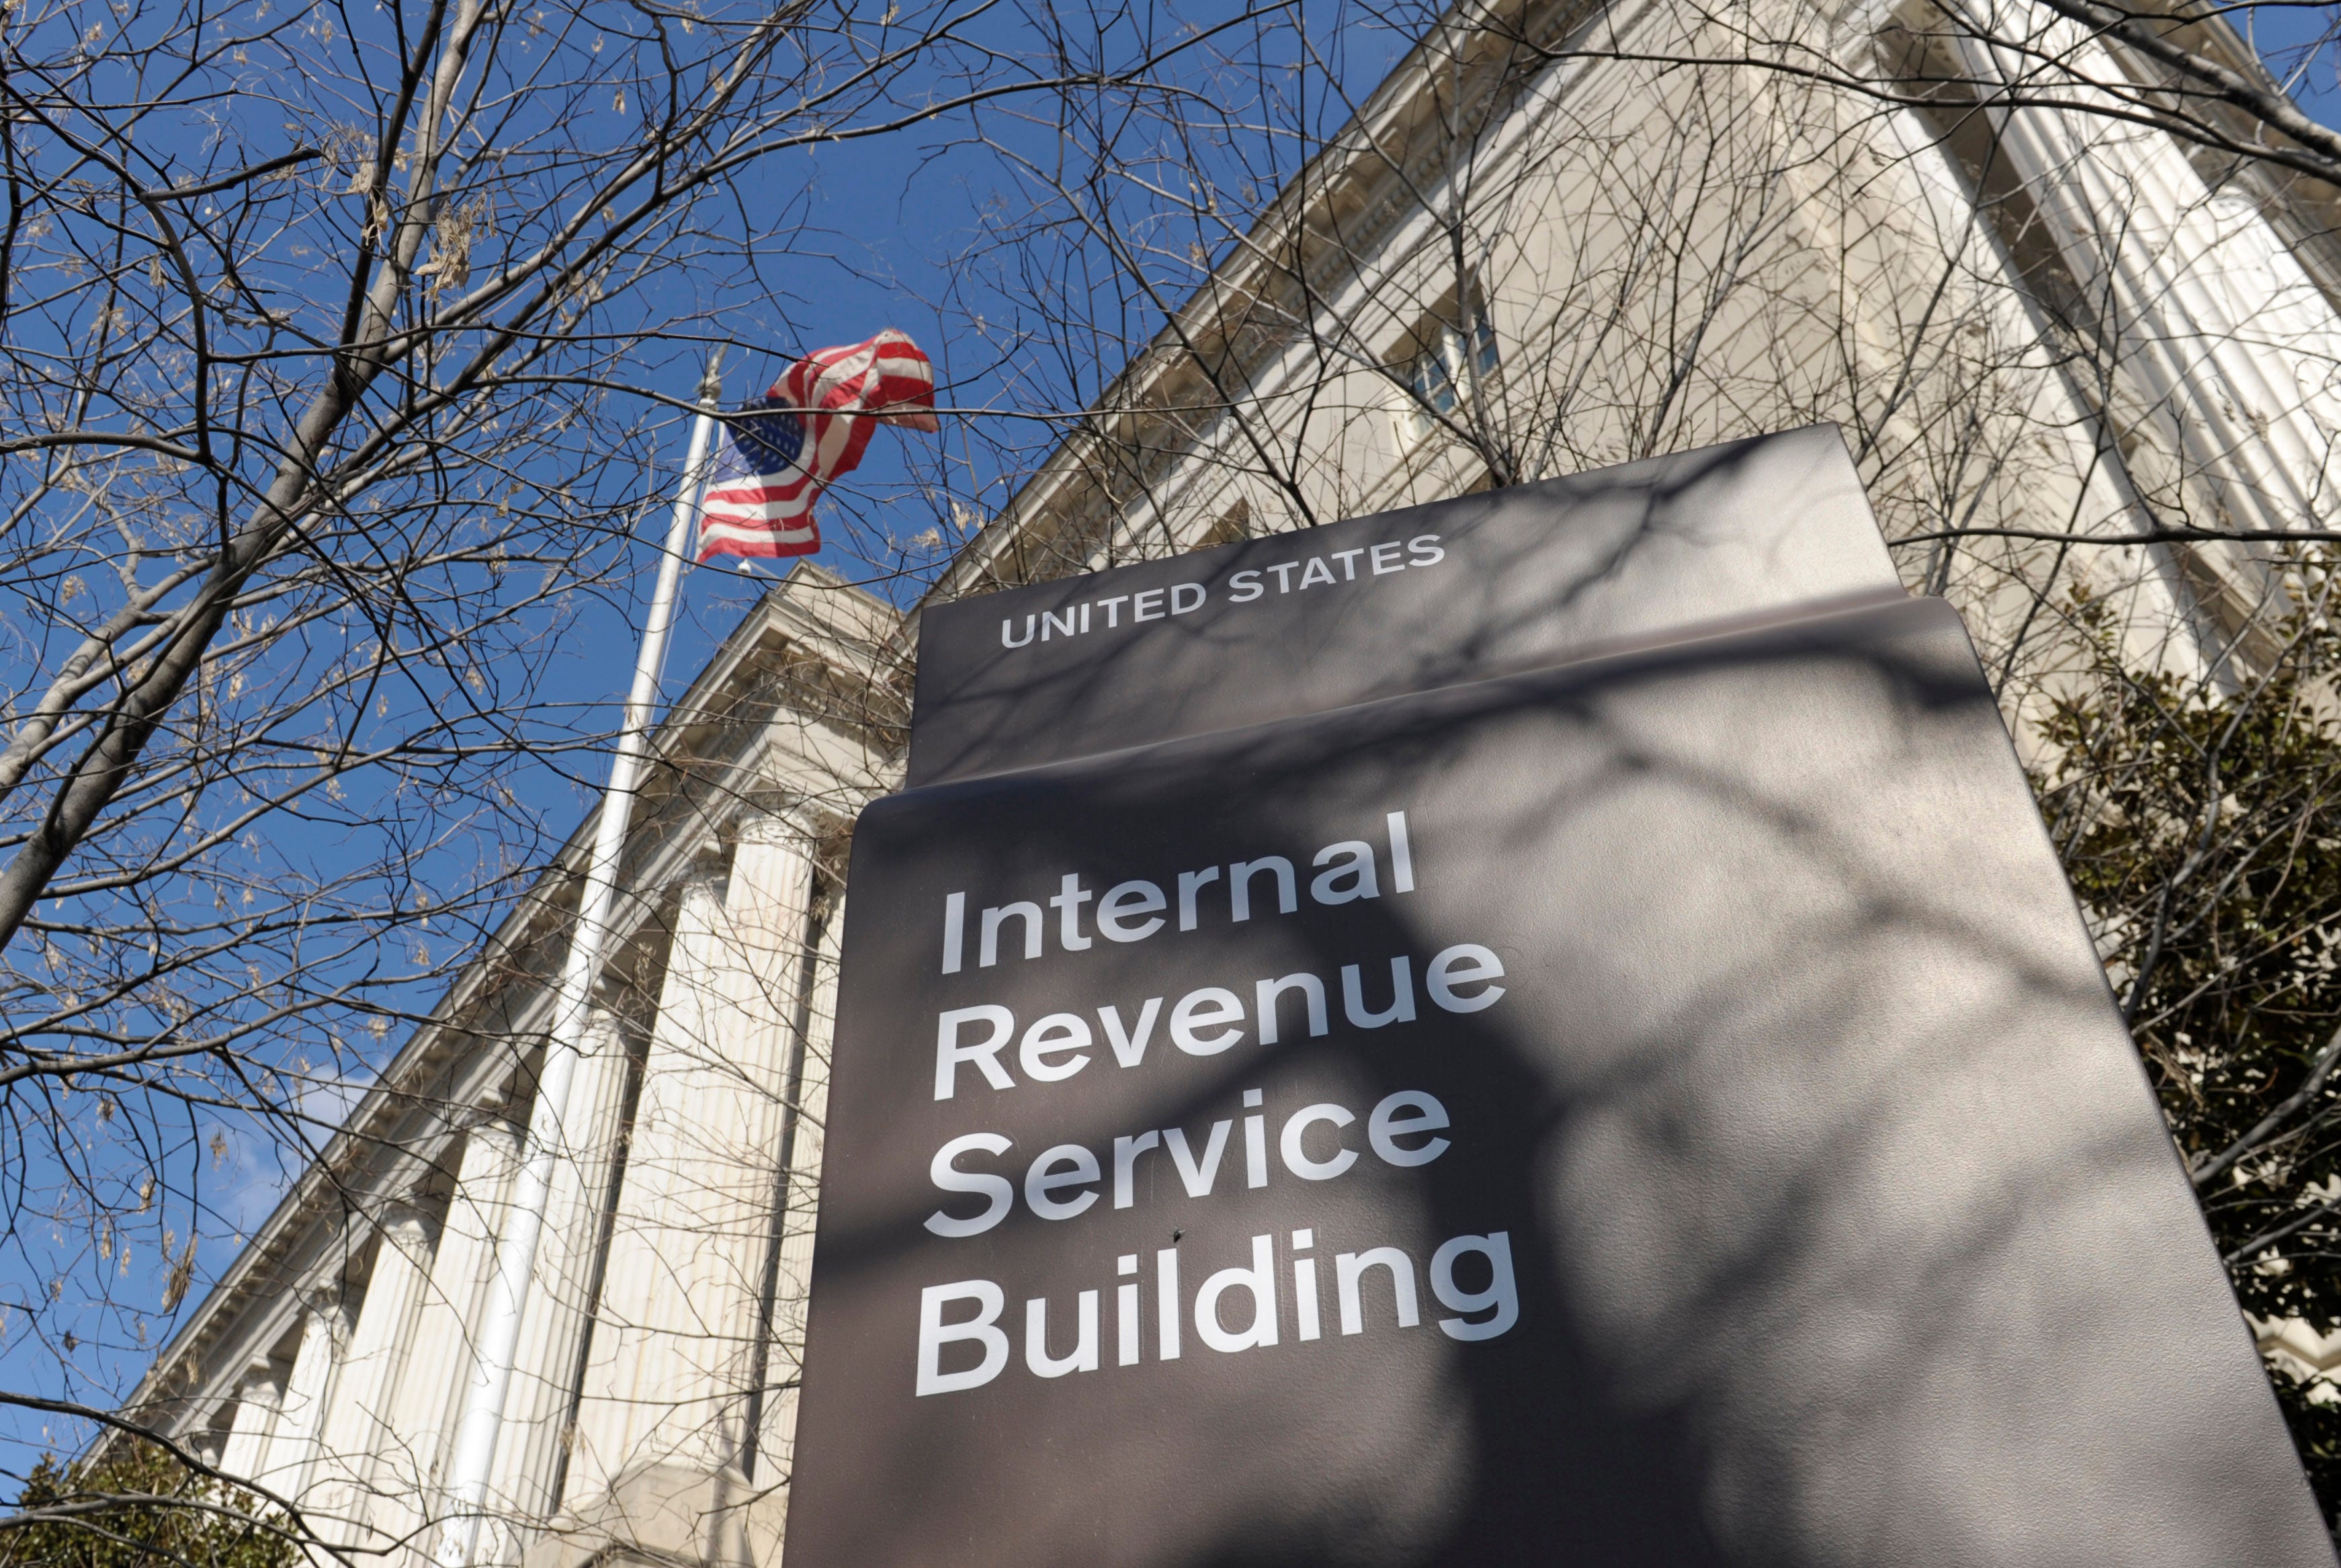 Her job was to help victims of identity theft. Instead, she used them to steal from the IRS
  